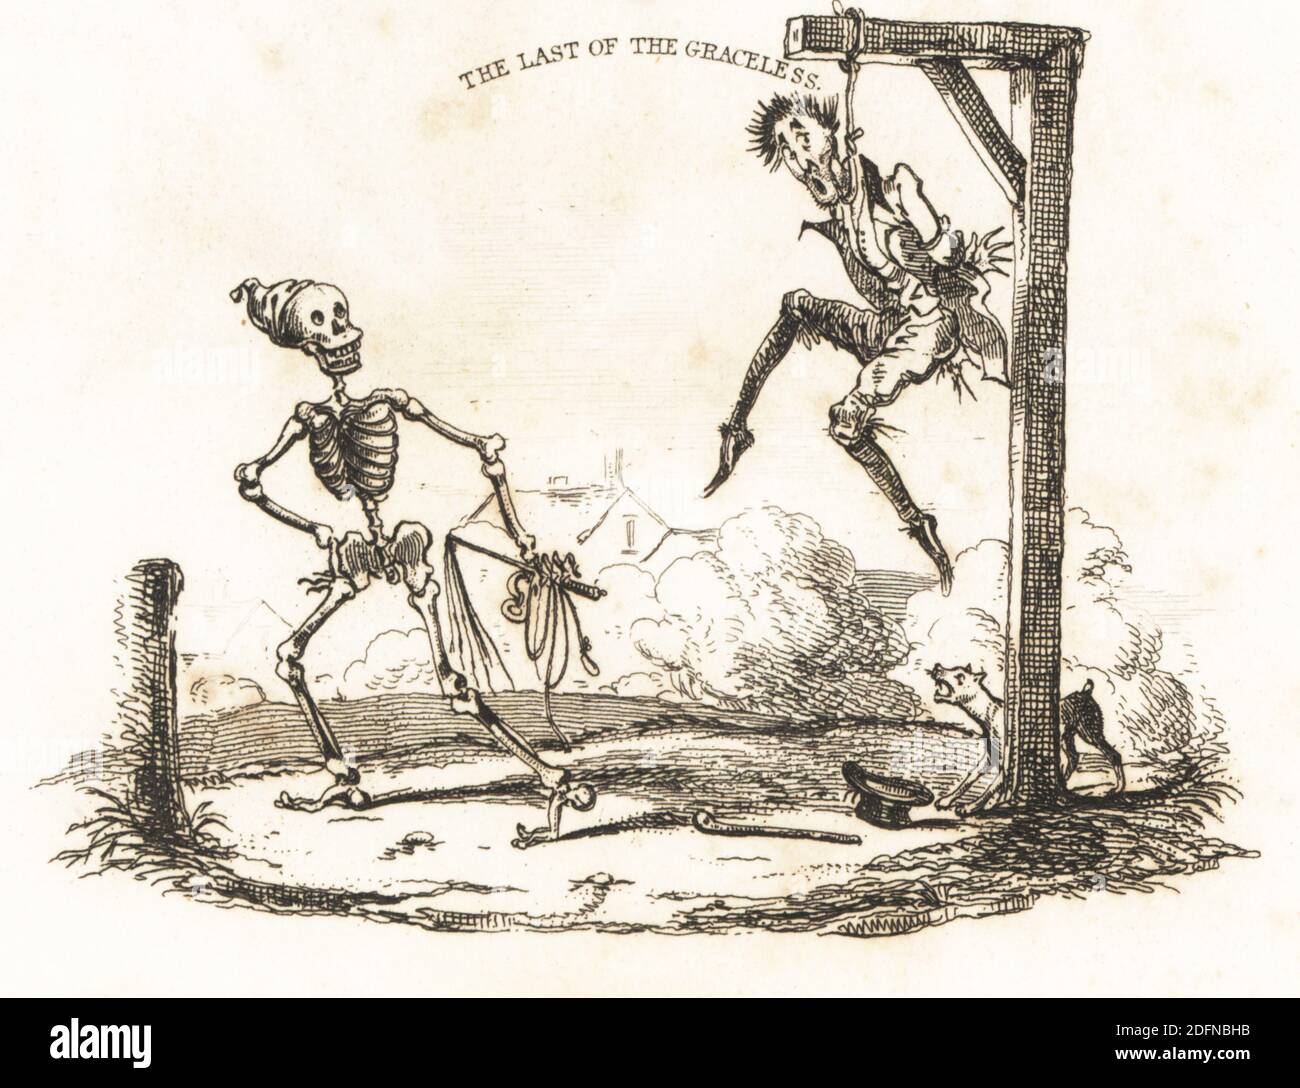 Vignette of the skeleton of Death with rope and whip looking at a man hanging from a gibbet, the Last of the Graceless. Drawn and engraved on steel by Richard Dagley from his own Death’s Doings, Consisting of Numerous Original Compositions in Verse and Prose, J. Andrews, London, 1827. Dagley (1761-1841) was an English painter, illustrator and engraver. Stock Photo